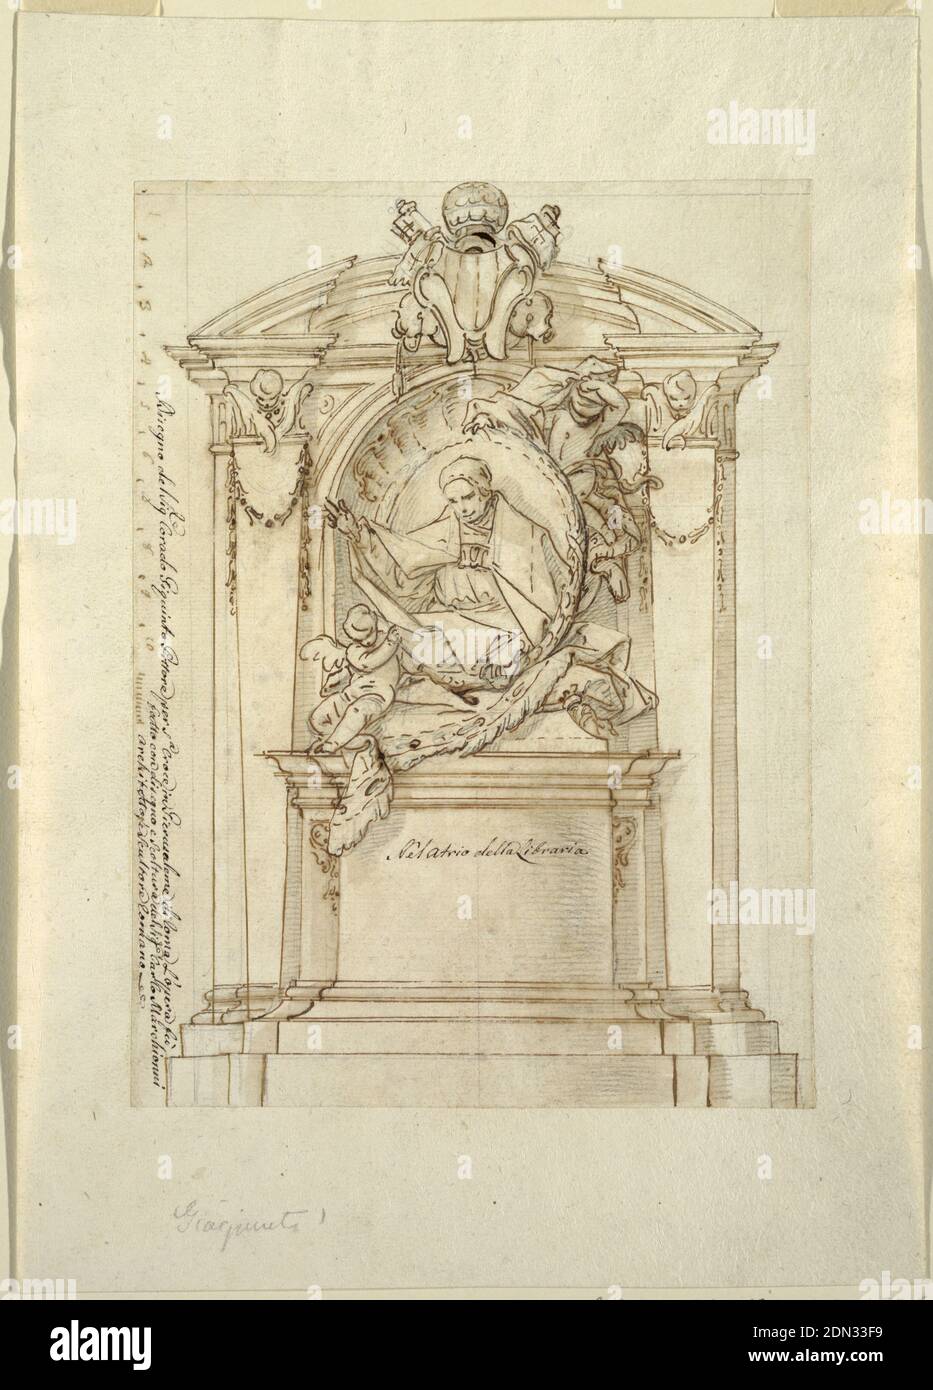 Design for a monument, Corrado Giaquinto, Italian, 1703 - 1765, Black chalk, pen and brown ink, brush and wash on paper, A pedestal stands in front of a niche, flanked by pilasters shaped like gaines and showing cherubim in the capitals. Two angels, one of whom is flying, support a medallion portrait of the pope. His coat of arms is in front of the pediment. The scale is at the left edge., Italy, ca. 1750, architecture, Drawing Stock Photo